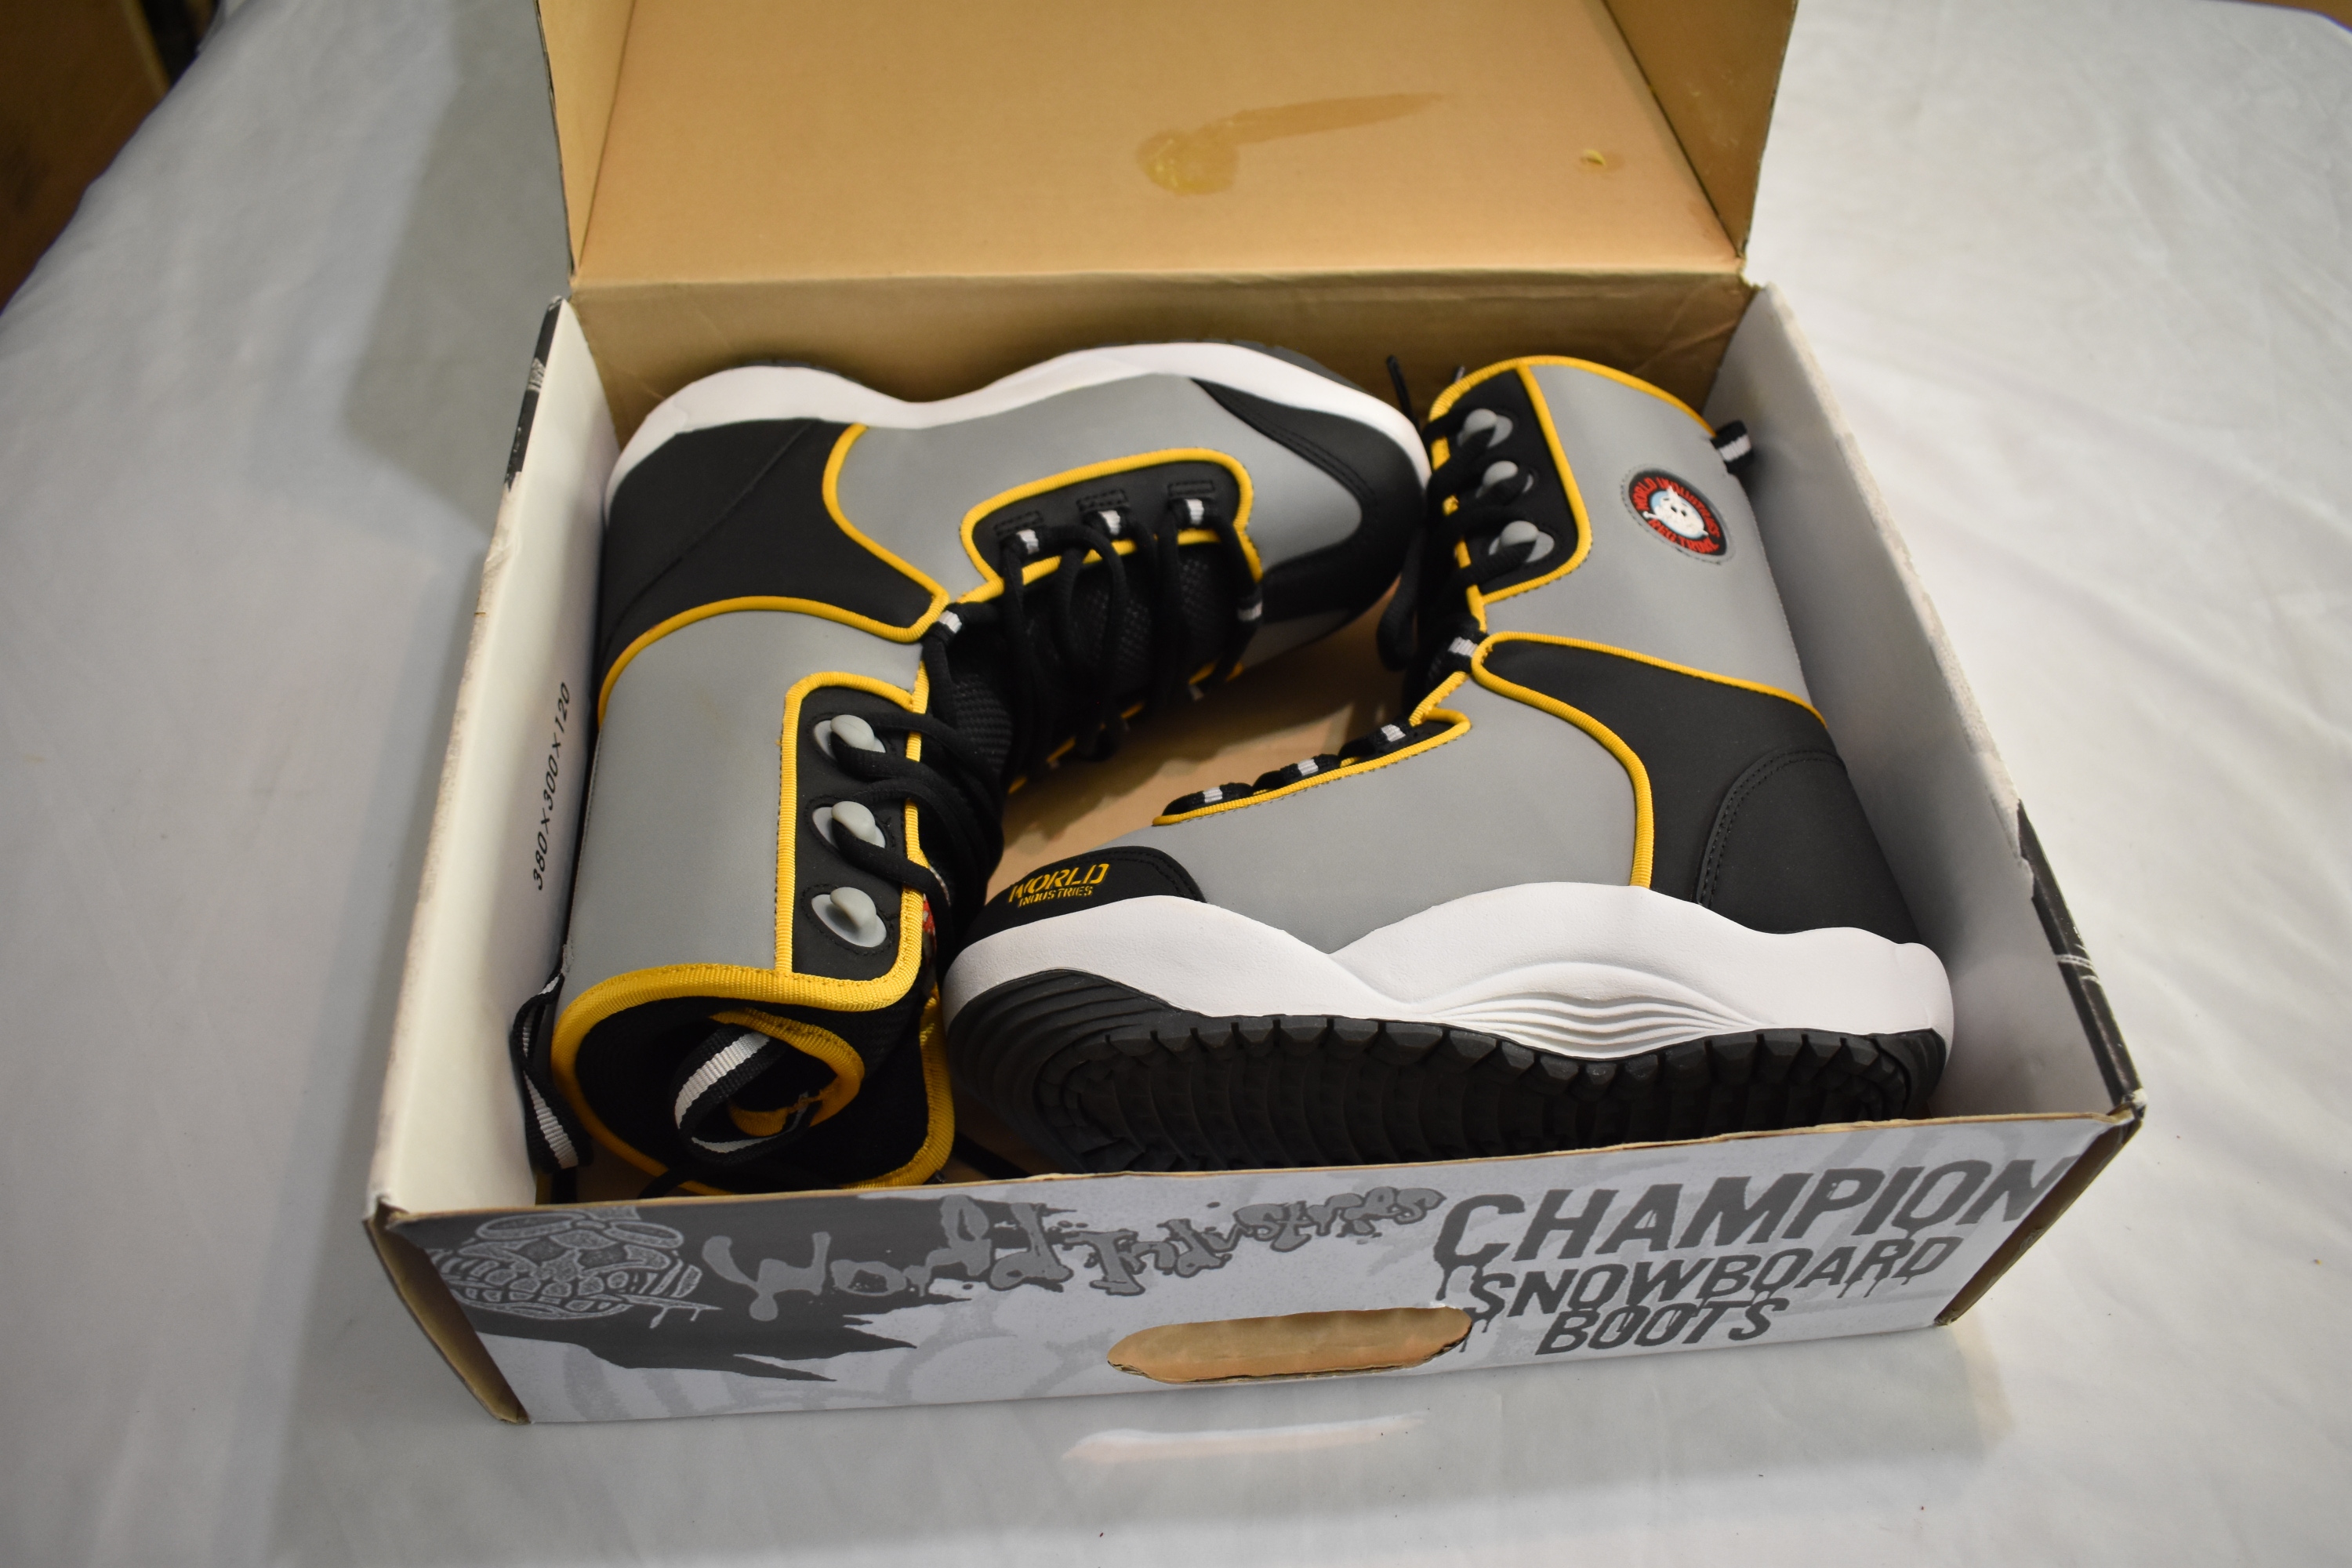 NEW - World Industries Champion Snowboard Boots, Size 4 - In the Box!